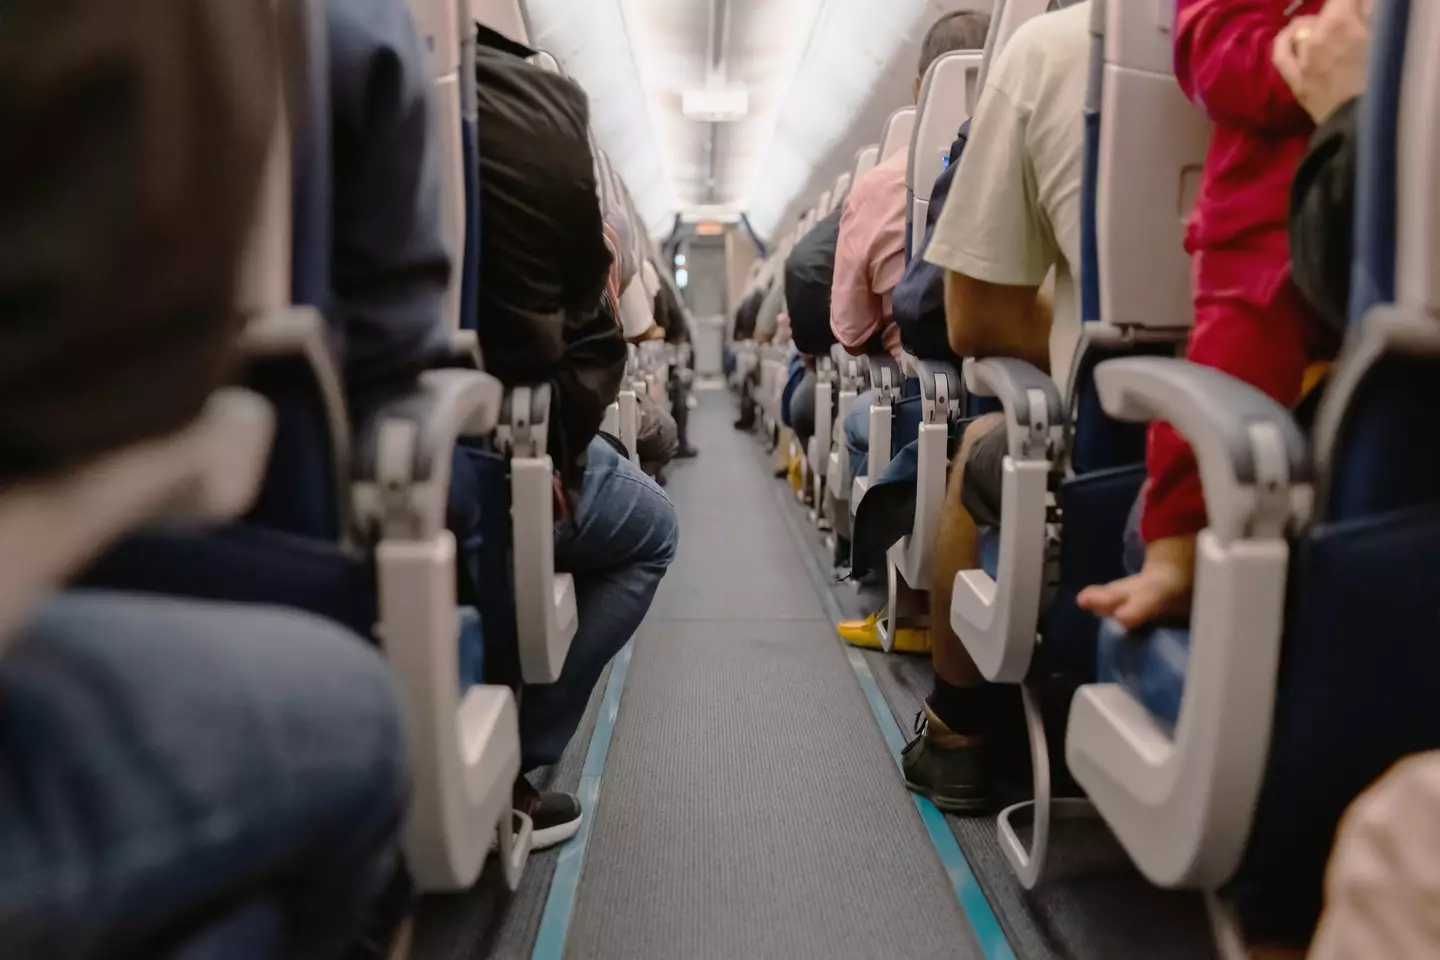 There's one thing you absolutely shouldn't do on a plane, according to the expert.